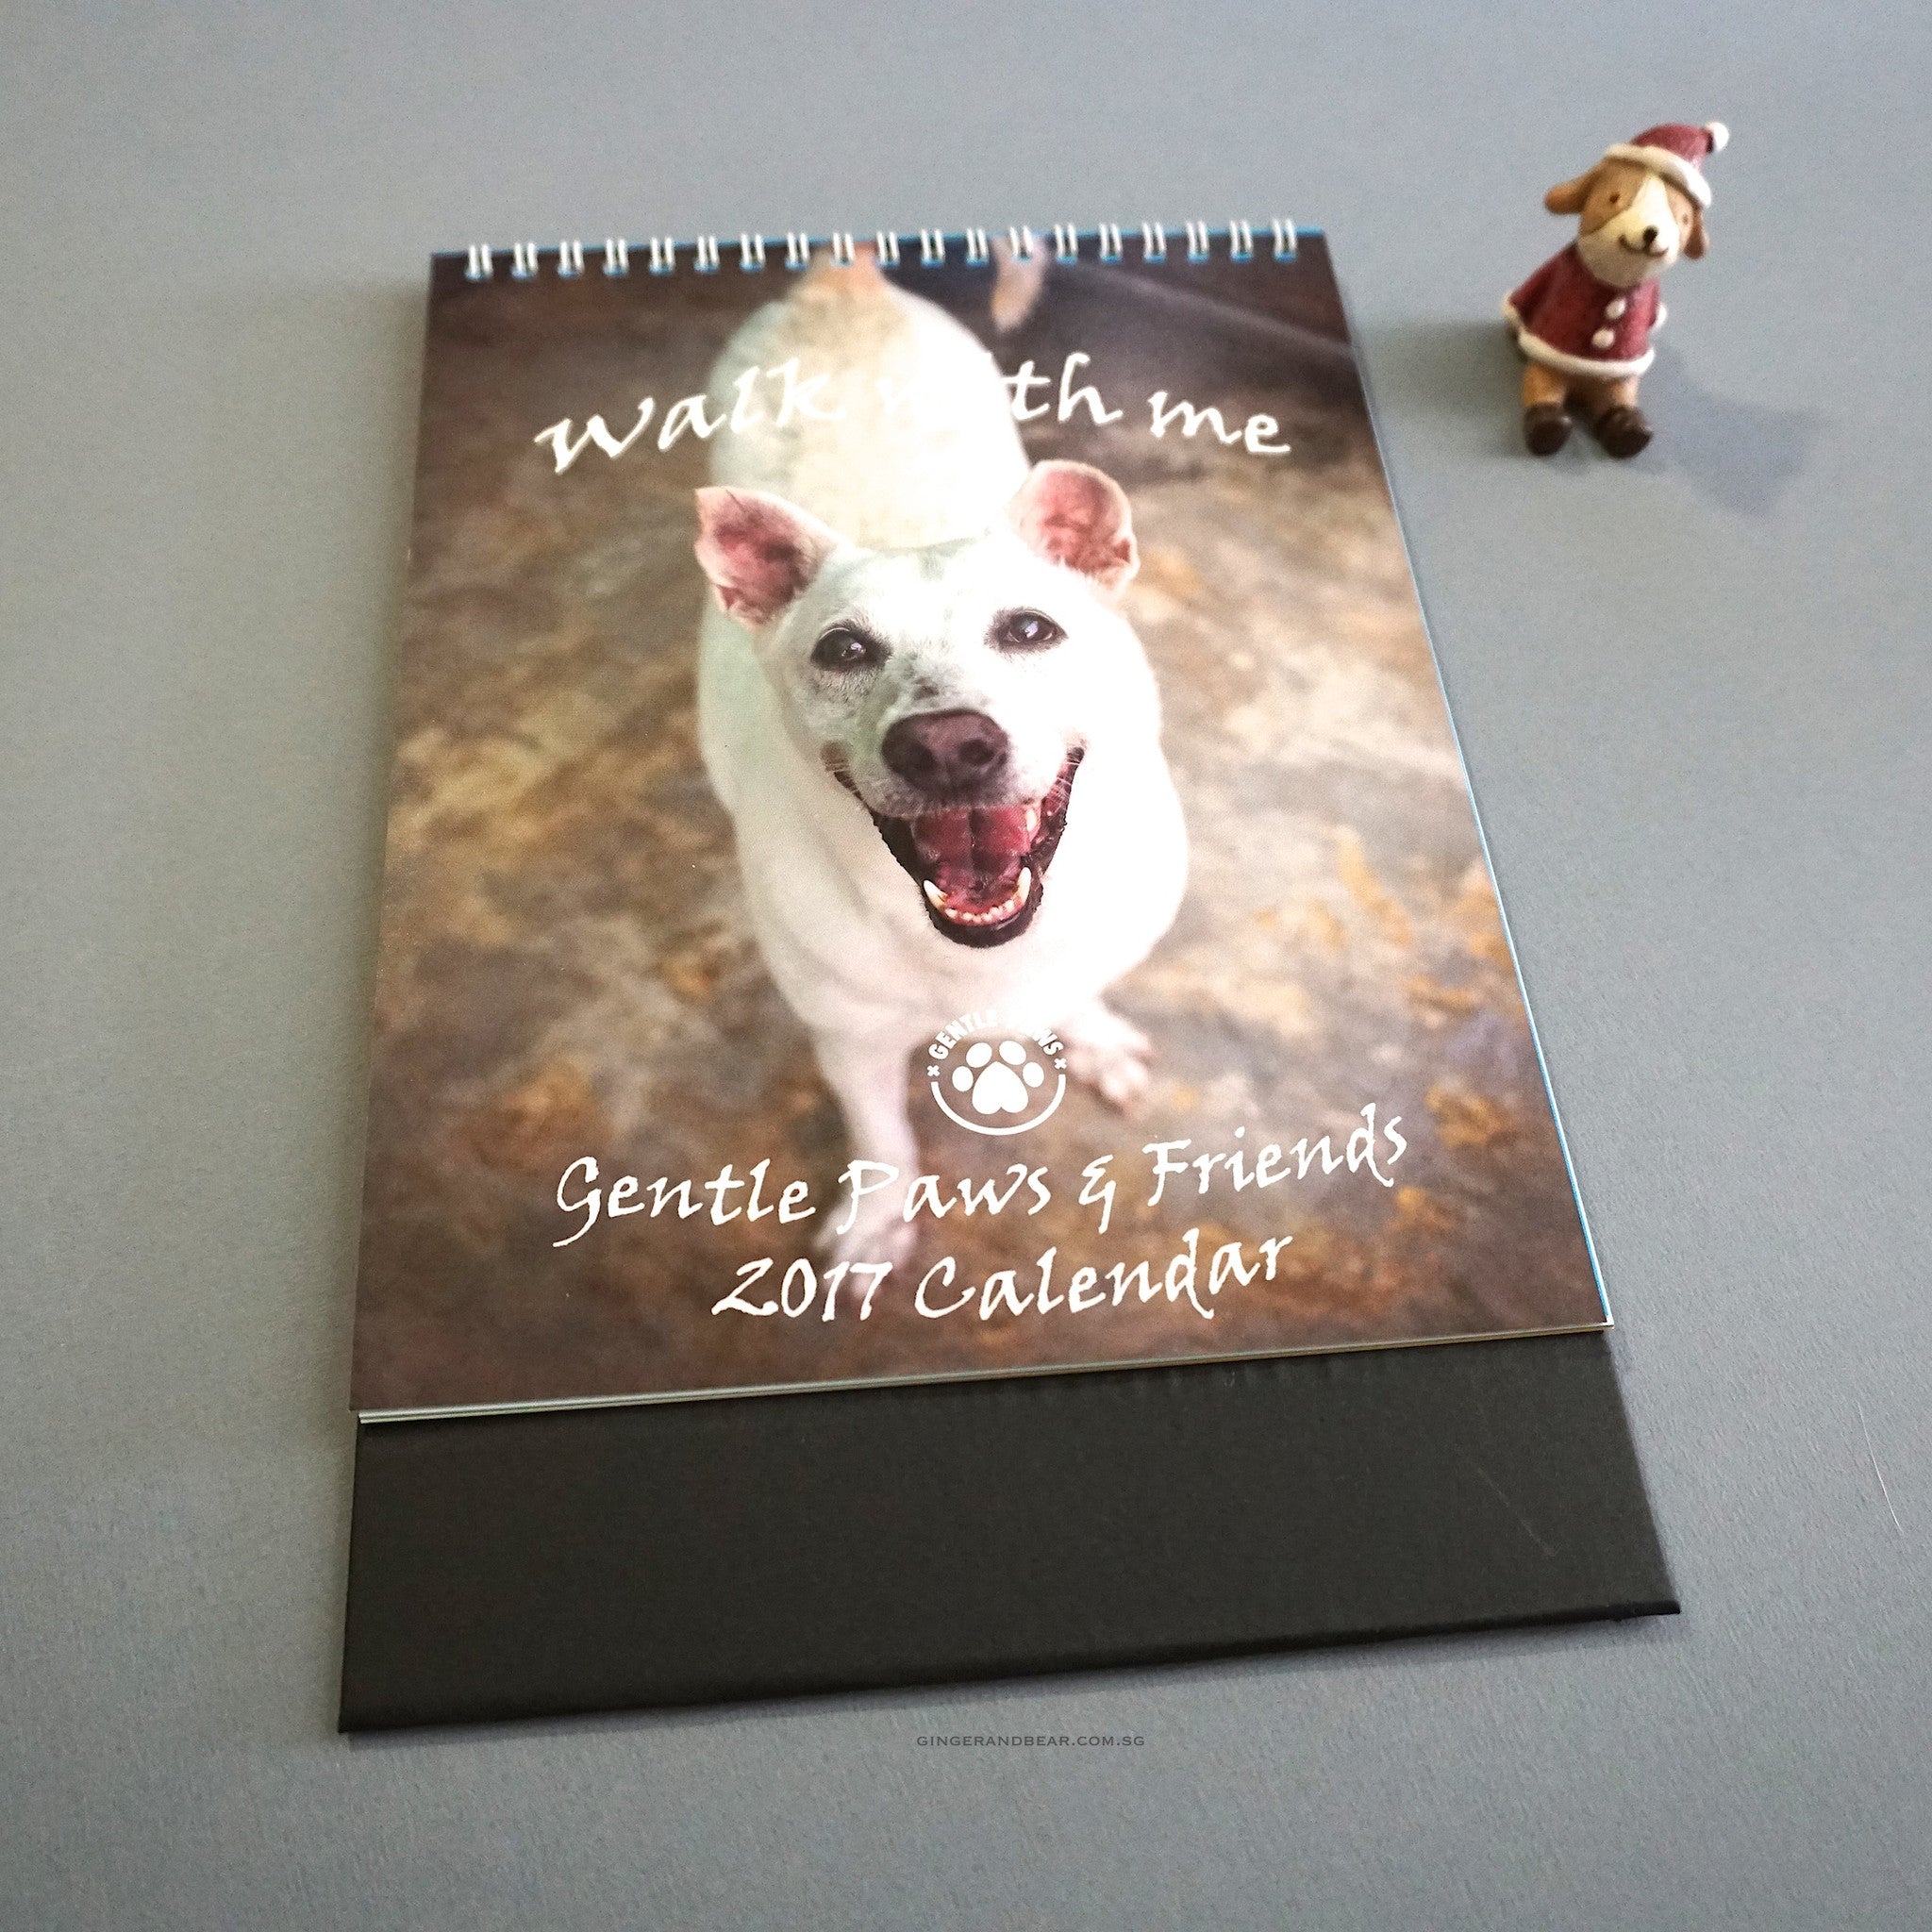 2017 calendar by Gentle Paws